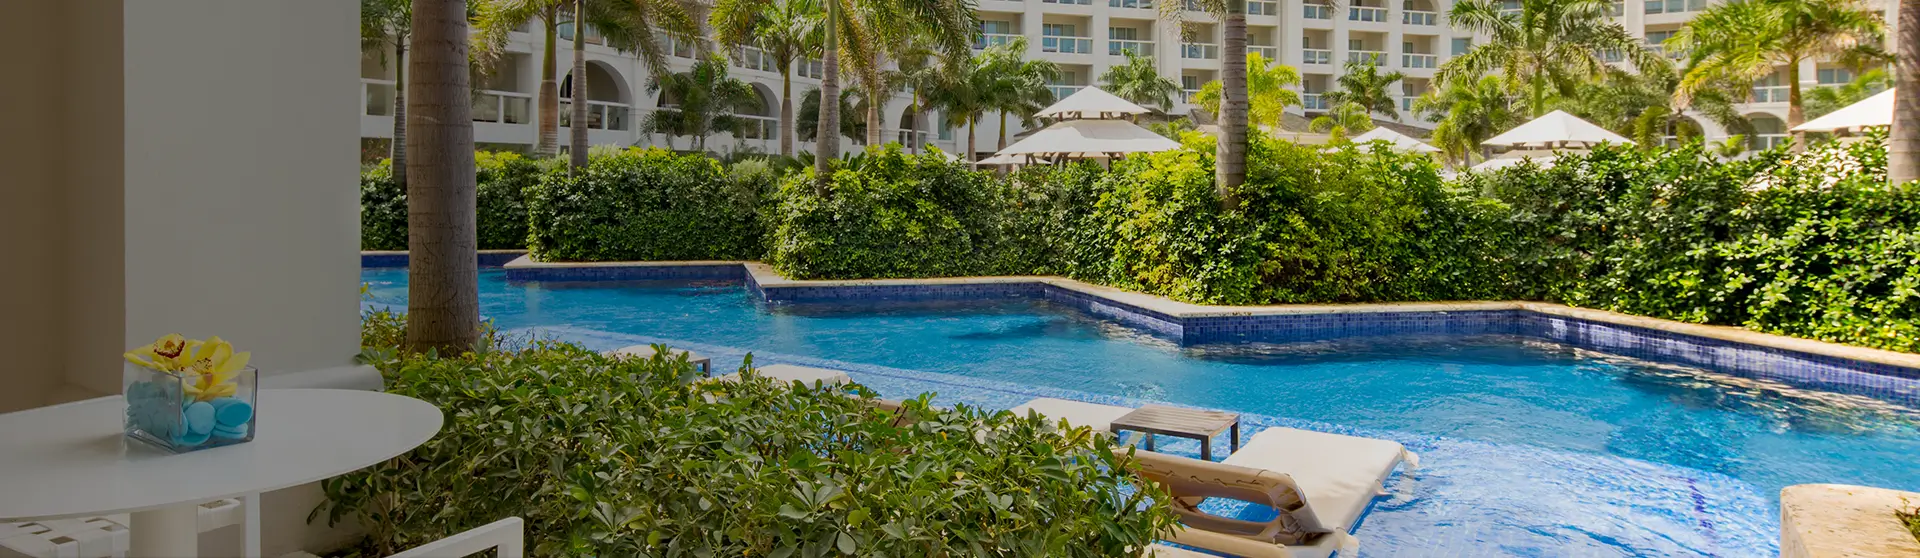 The Top 6 All-Inclusive Family Resorts with Swim-up Rooms in Cancun